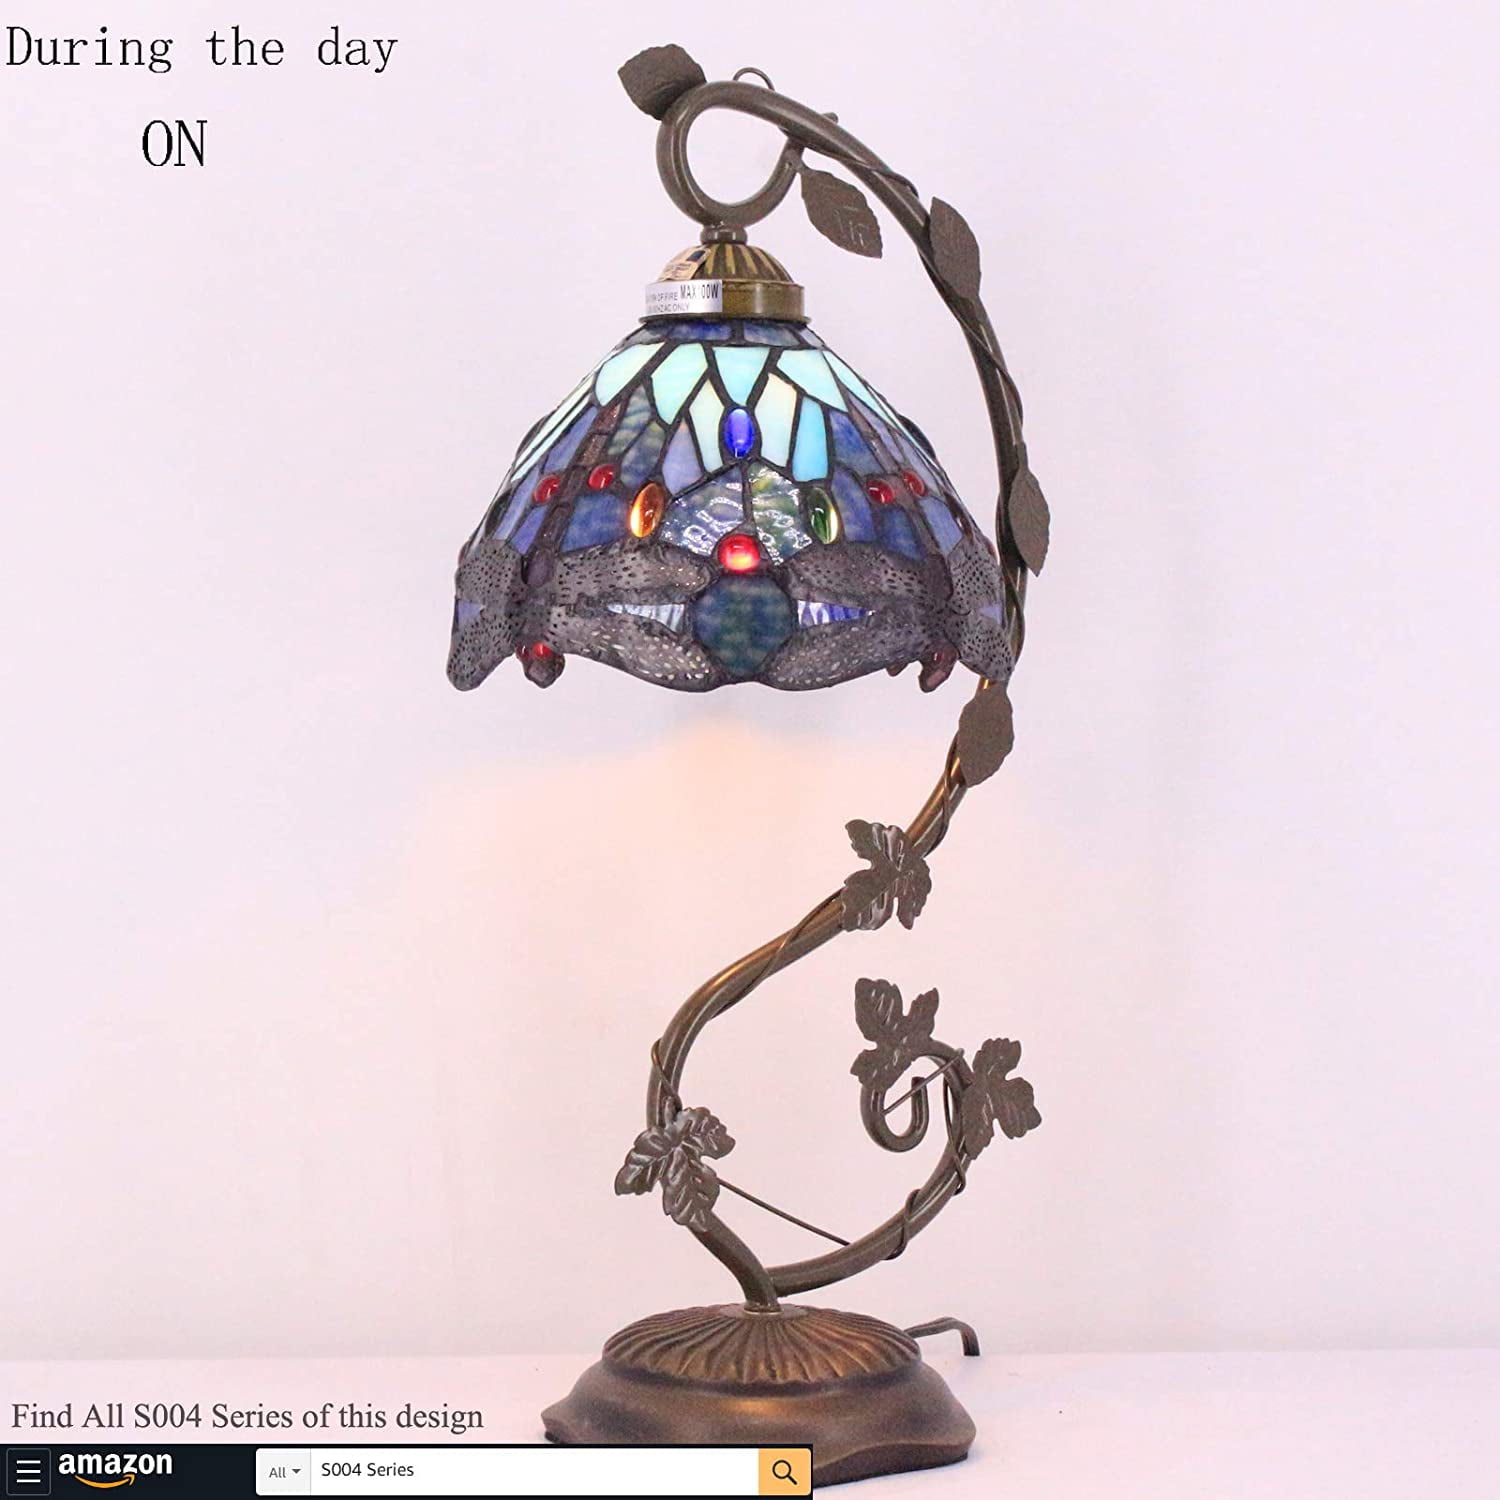 SHADY  Lamp Blue Stained Glass Dragonfly Style Table Lamp  Metal Leaf Base 8X10X21 Inches Desk Light Decor Small Space Bedroom Home Office S004 Series